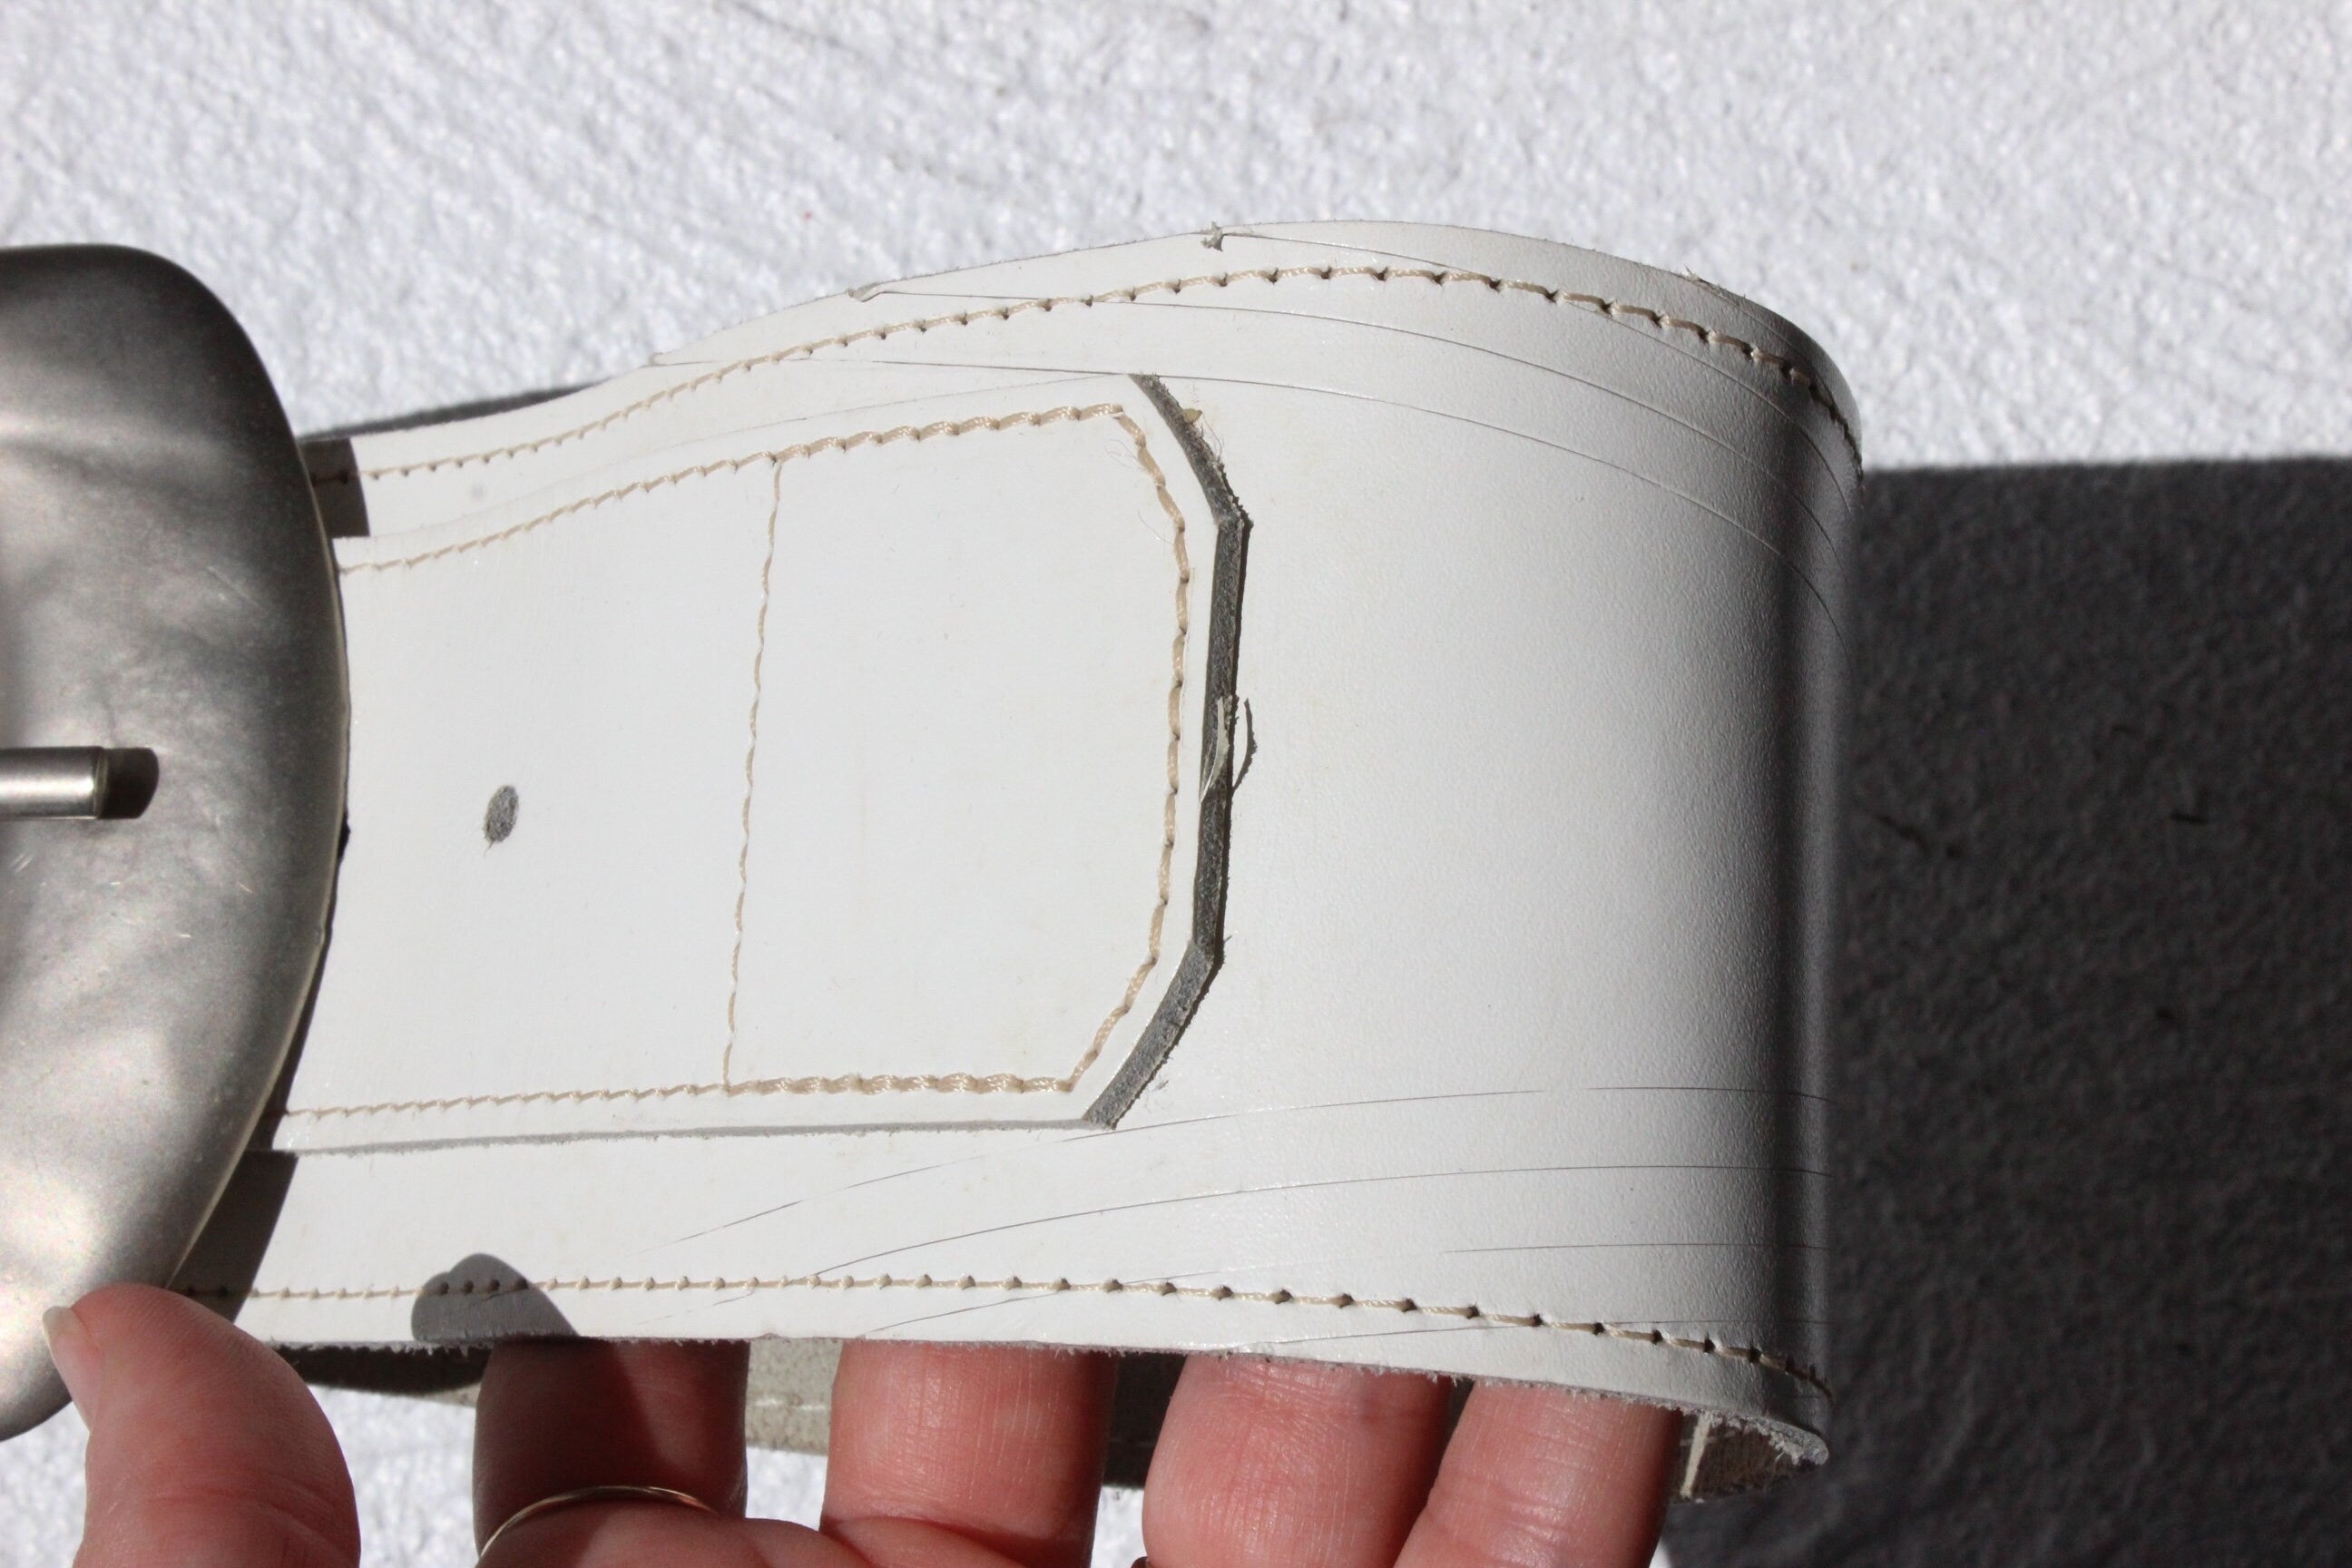 80s White Leather Belt w/ Oversized Silver Buckle